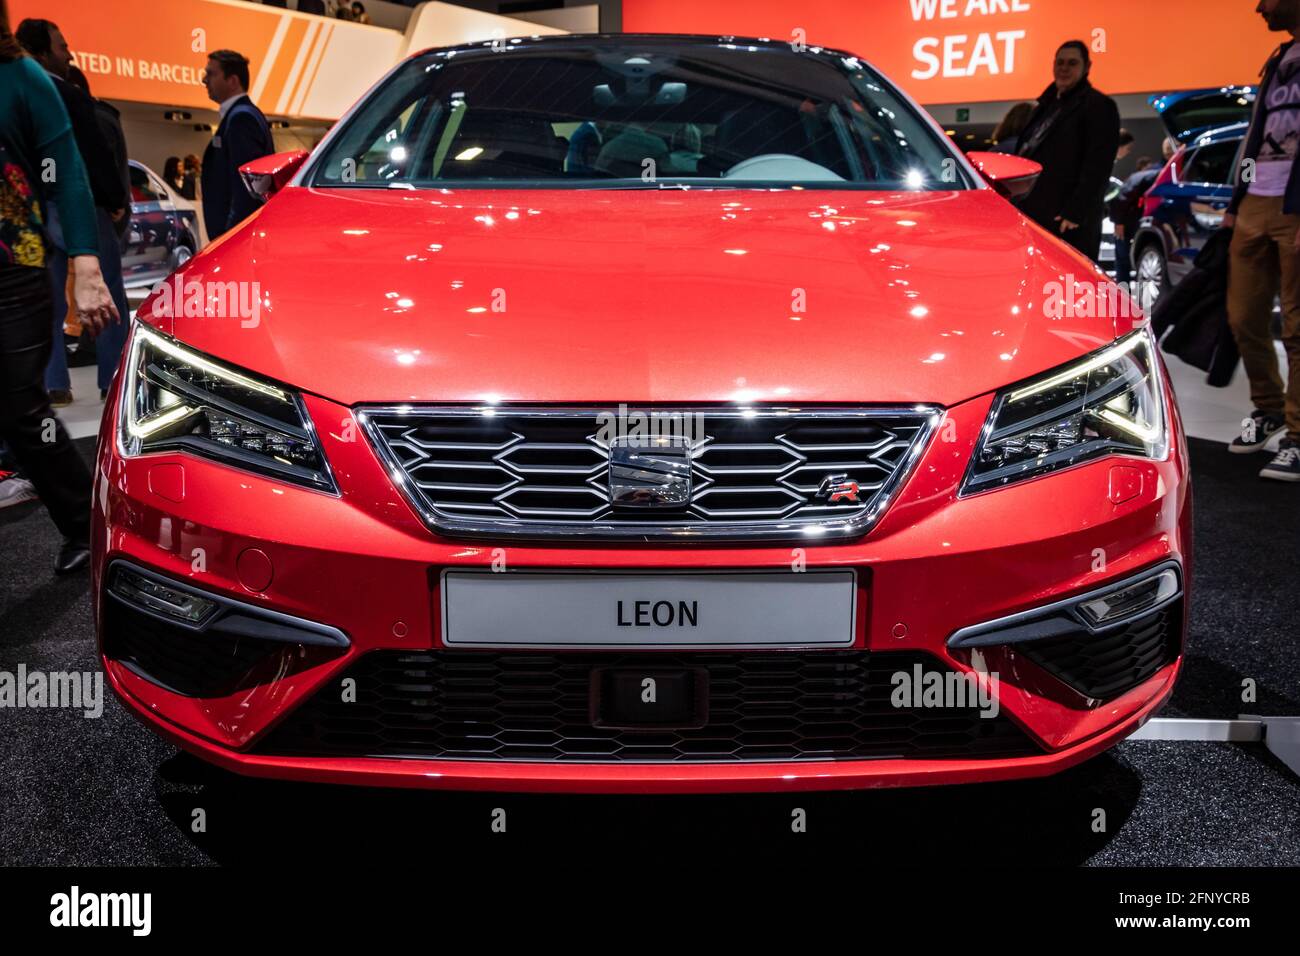 Seat Leon car showcased at the Brussels Expo Autosalon motor show. Belgium - January 19, 2017 Stock Photo